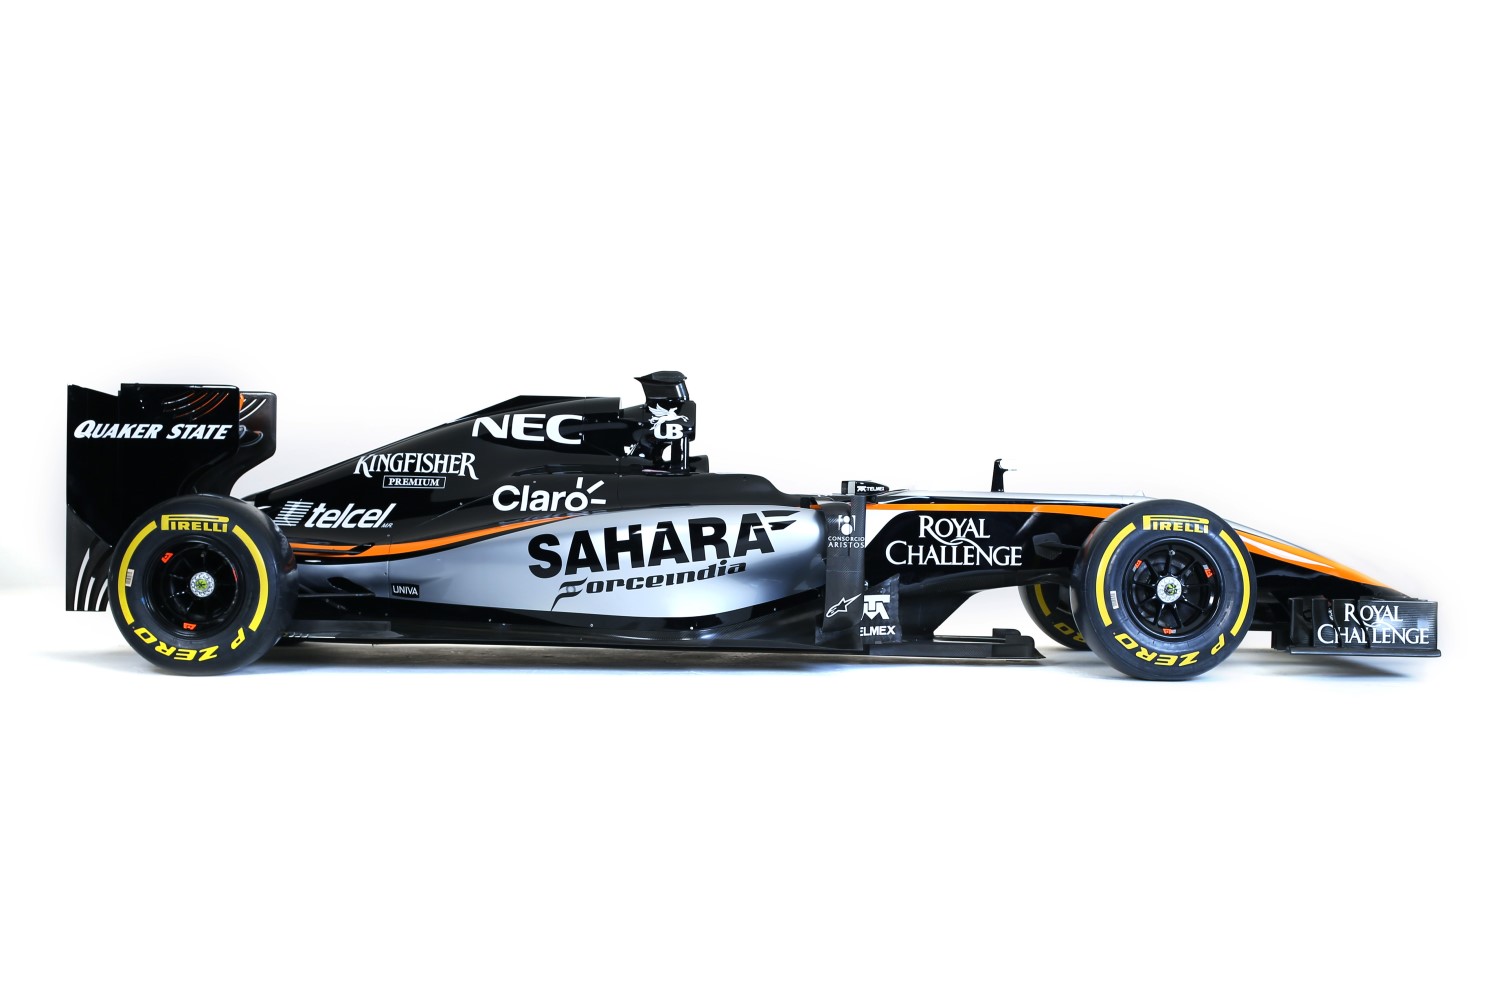 Sahara will be gone from Force India sidepods